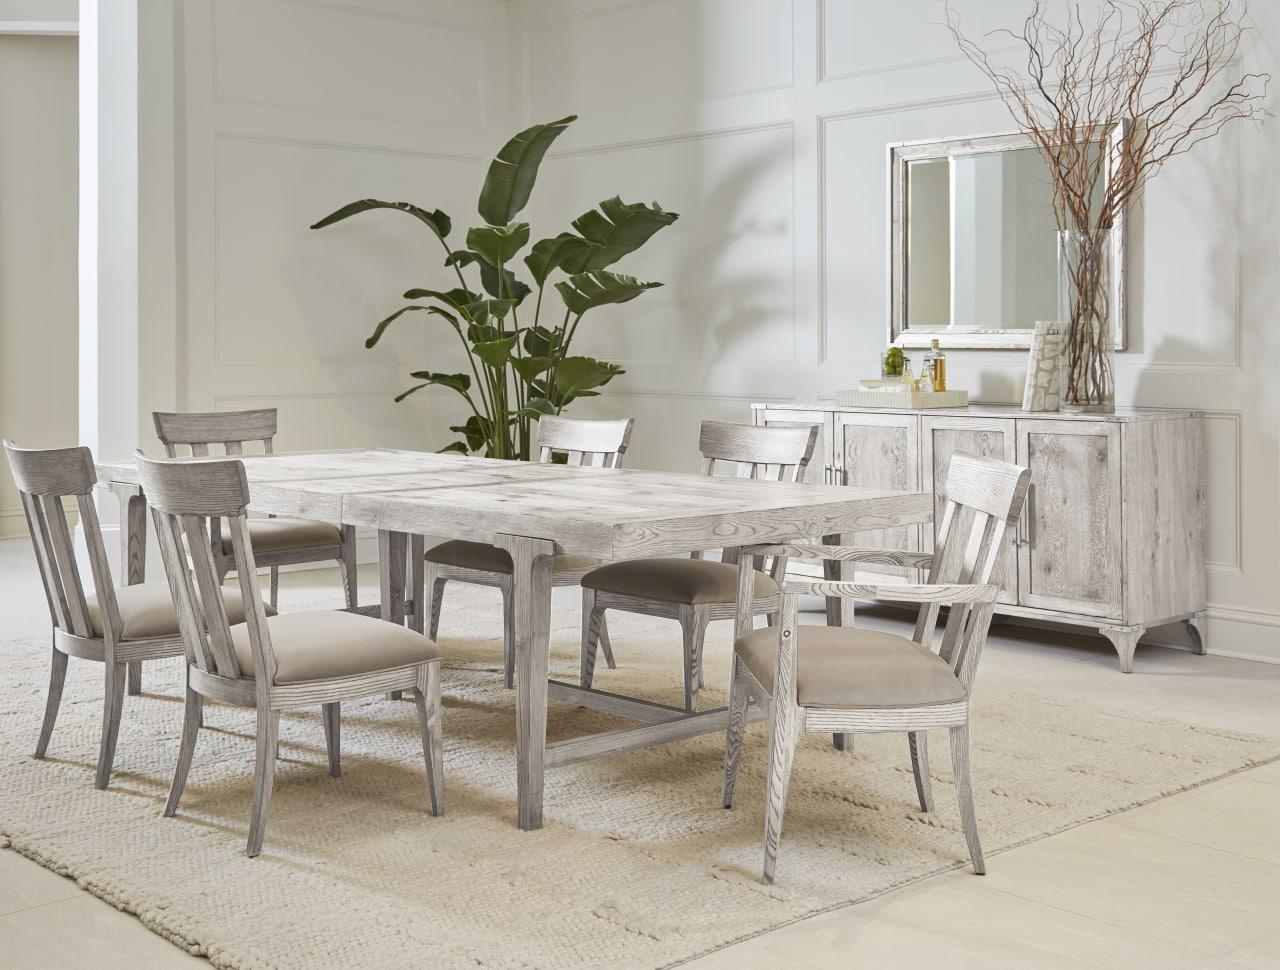 Traditional, Farmhouse Dining Table Set Sojourn 316220-2311-9pcs in Beige 